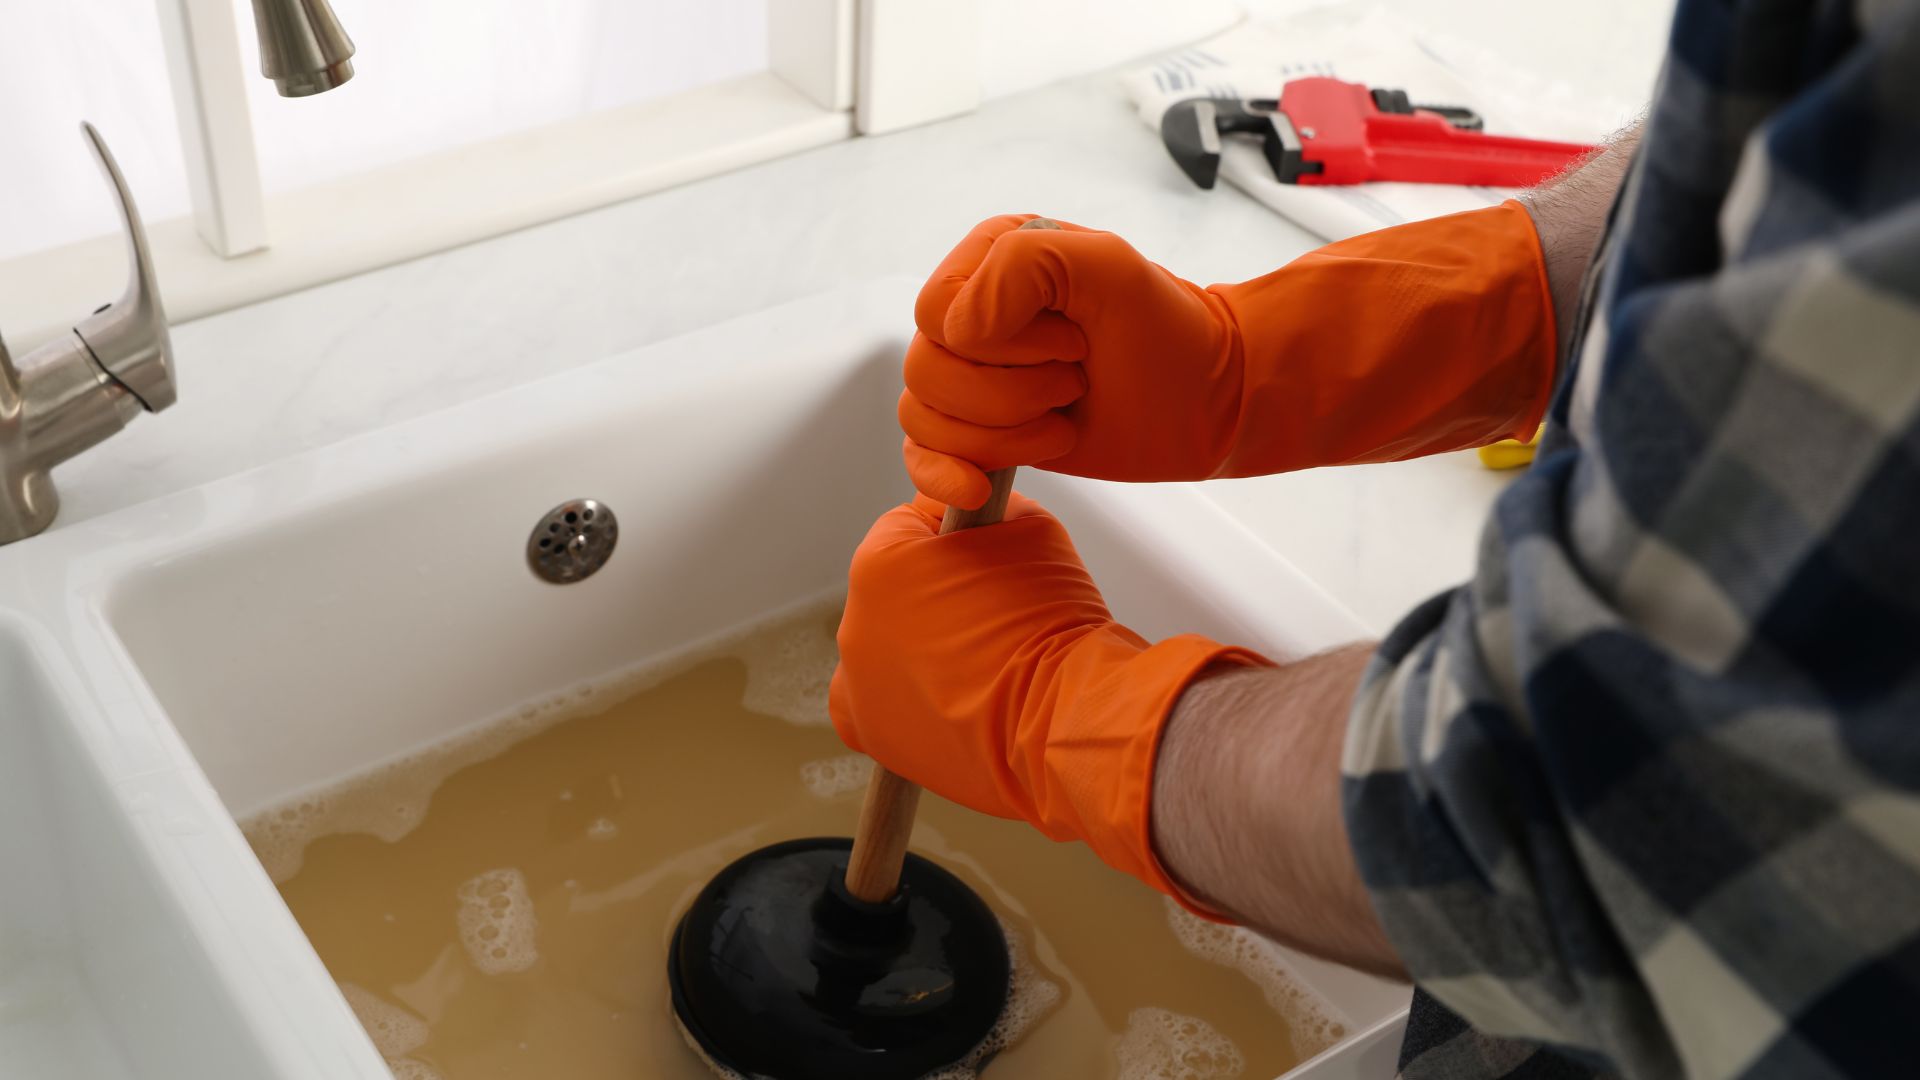 Blocked drains, a common issue, may necessitate the intervention of plumbers to restore proper flow.